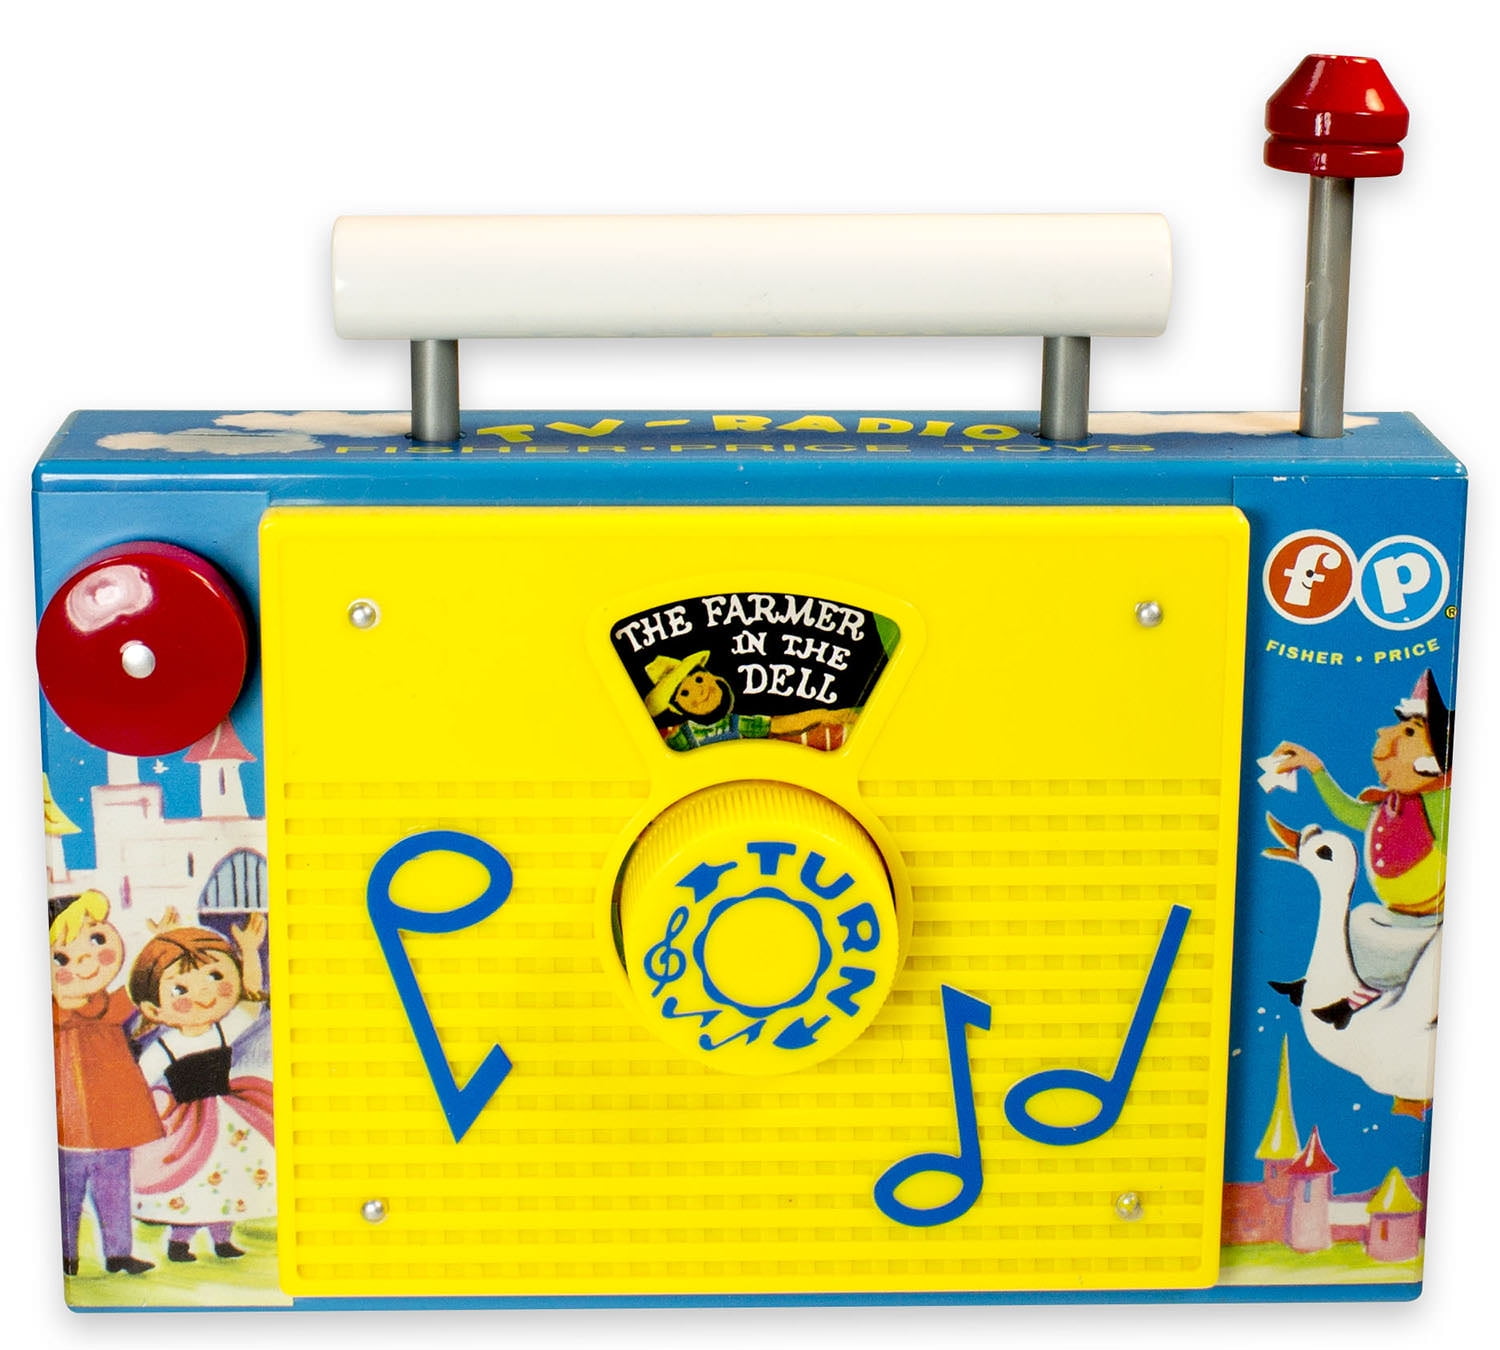 Basic Fun Jewelry Musical Classic Fisher Kids Music Boxes Radio TV for sale online 